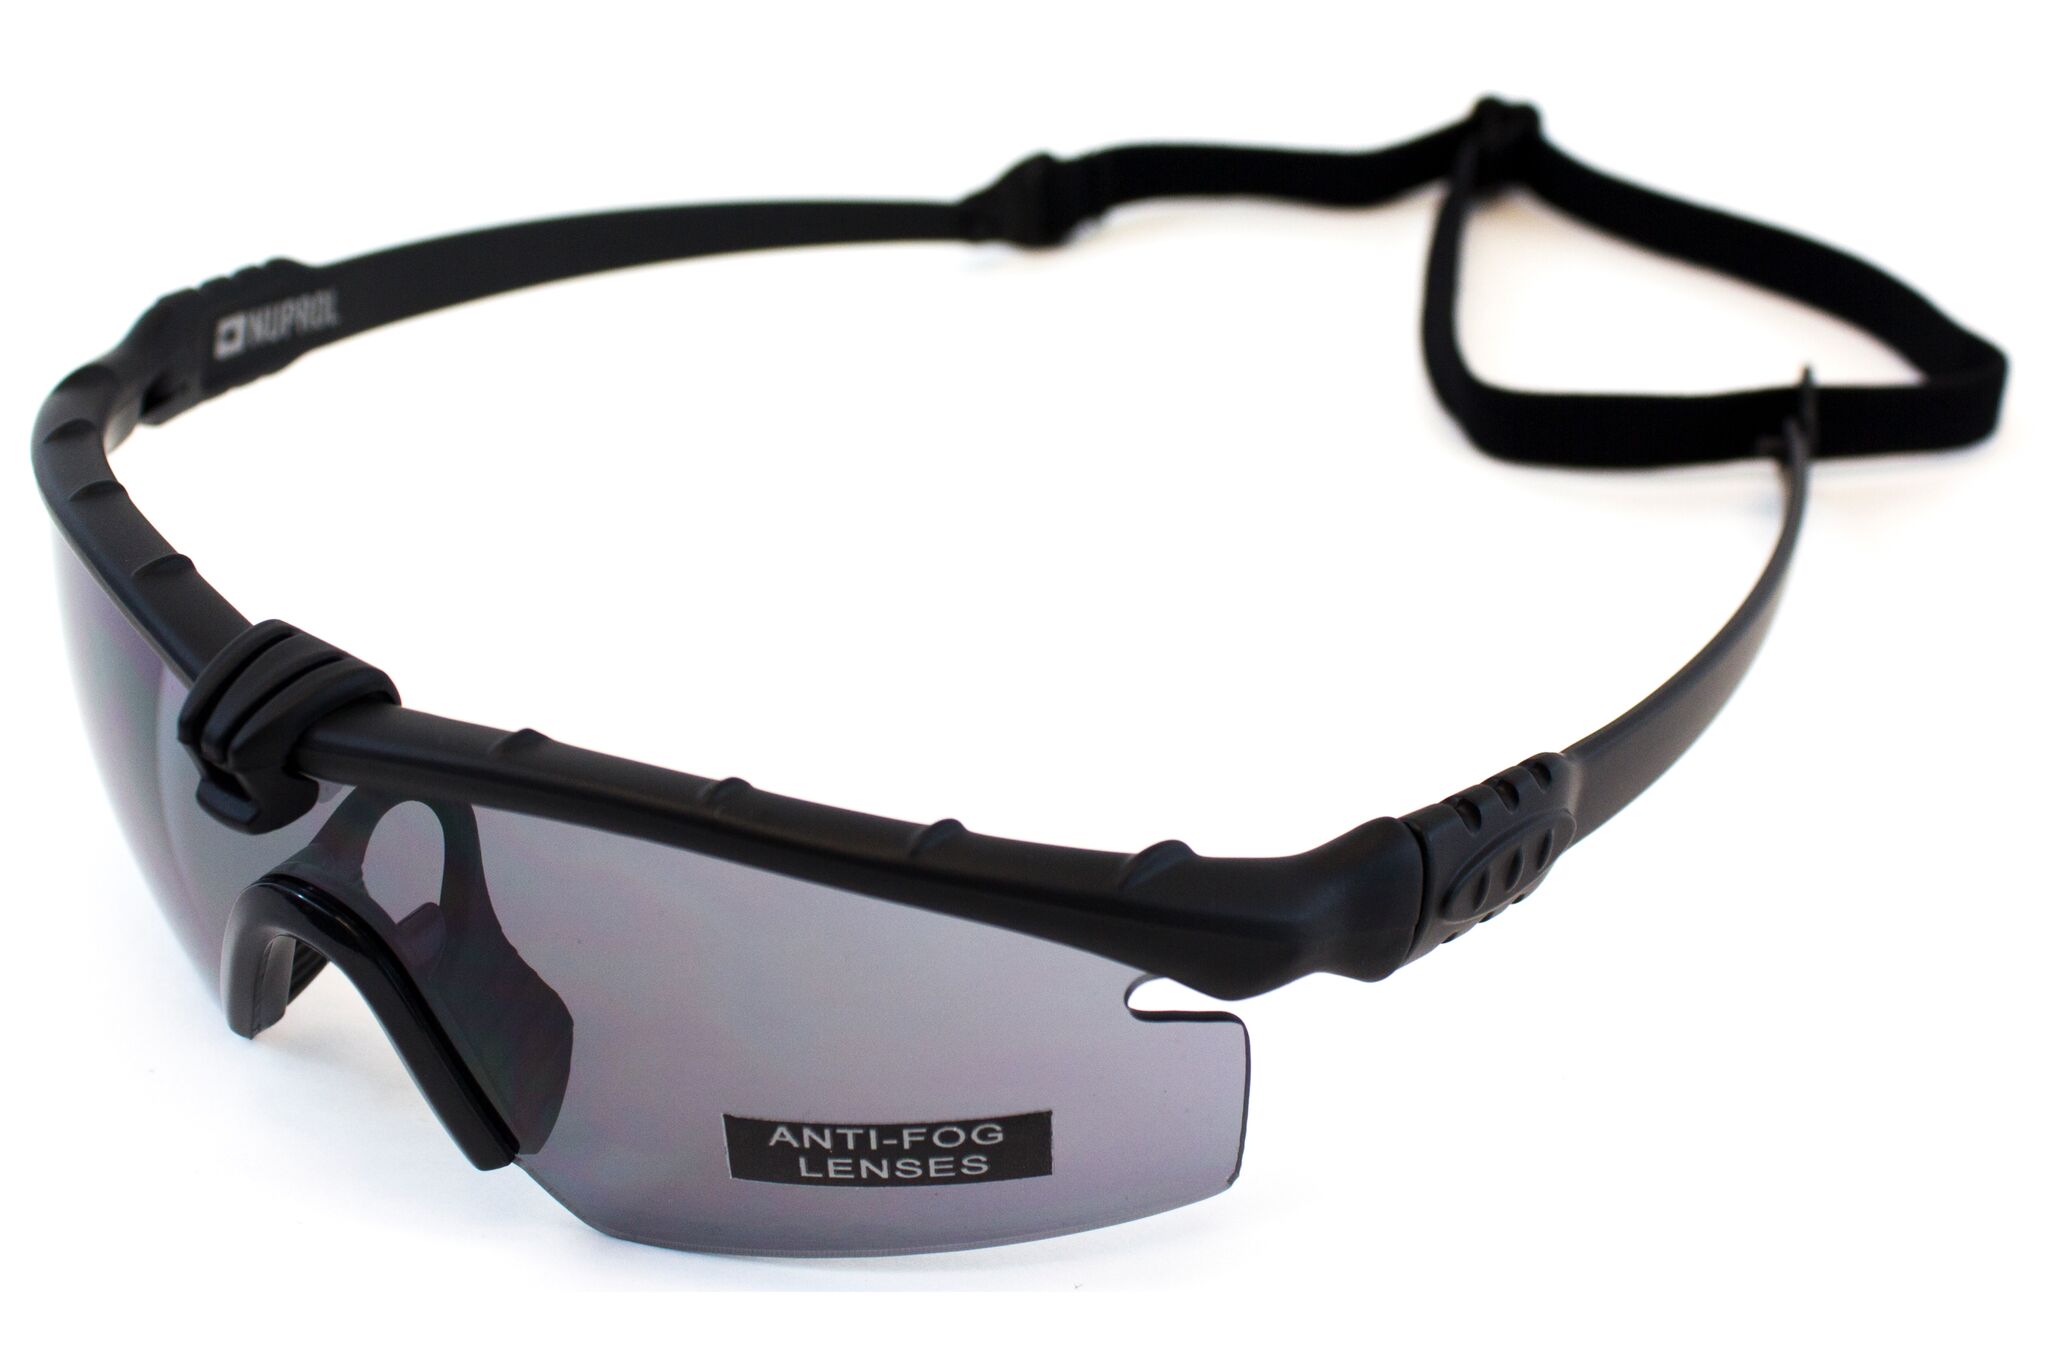 NP BATTLE PRO’S – BLACK FRAME / SMOKED LENSES | Rands Traders